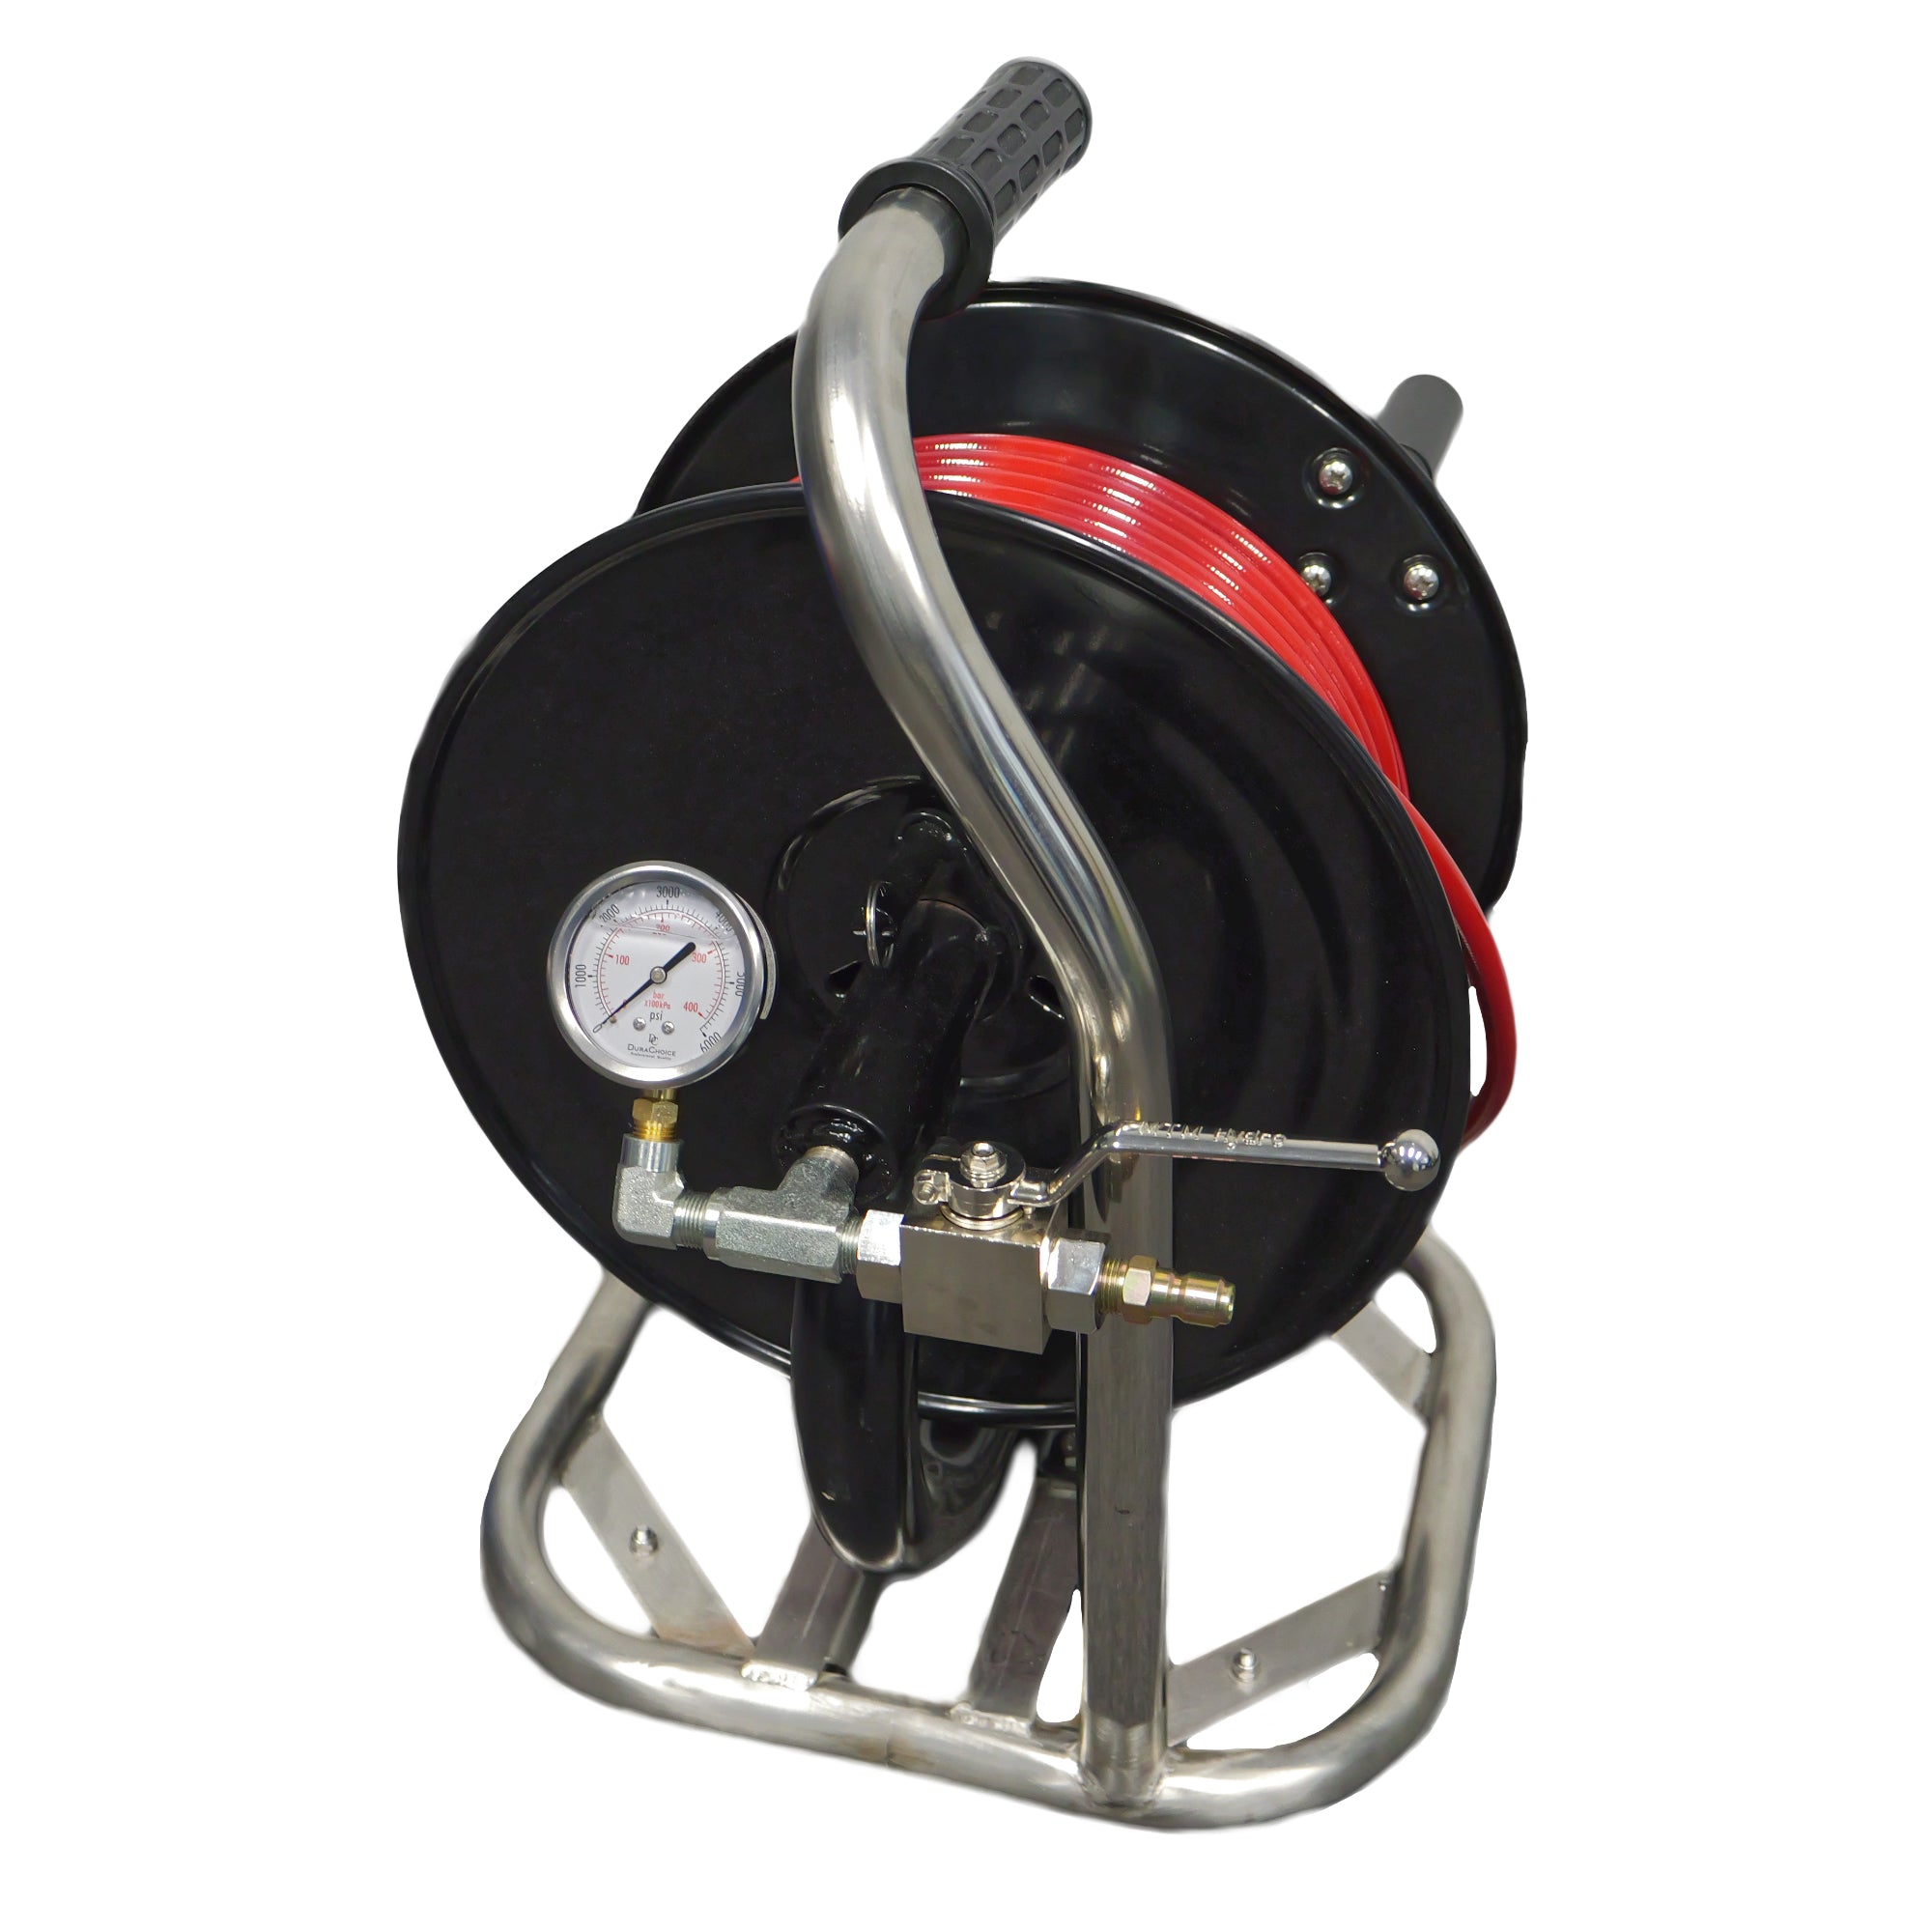 Portable Heavy Duty Deluxe Hose Reel with Jetter Hose – Jetters Northwest